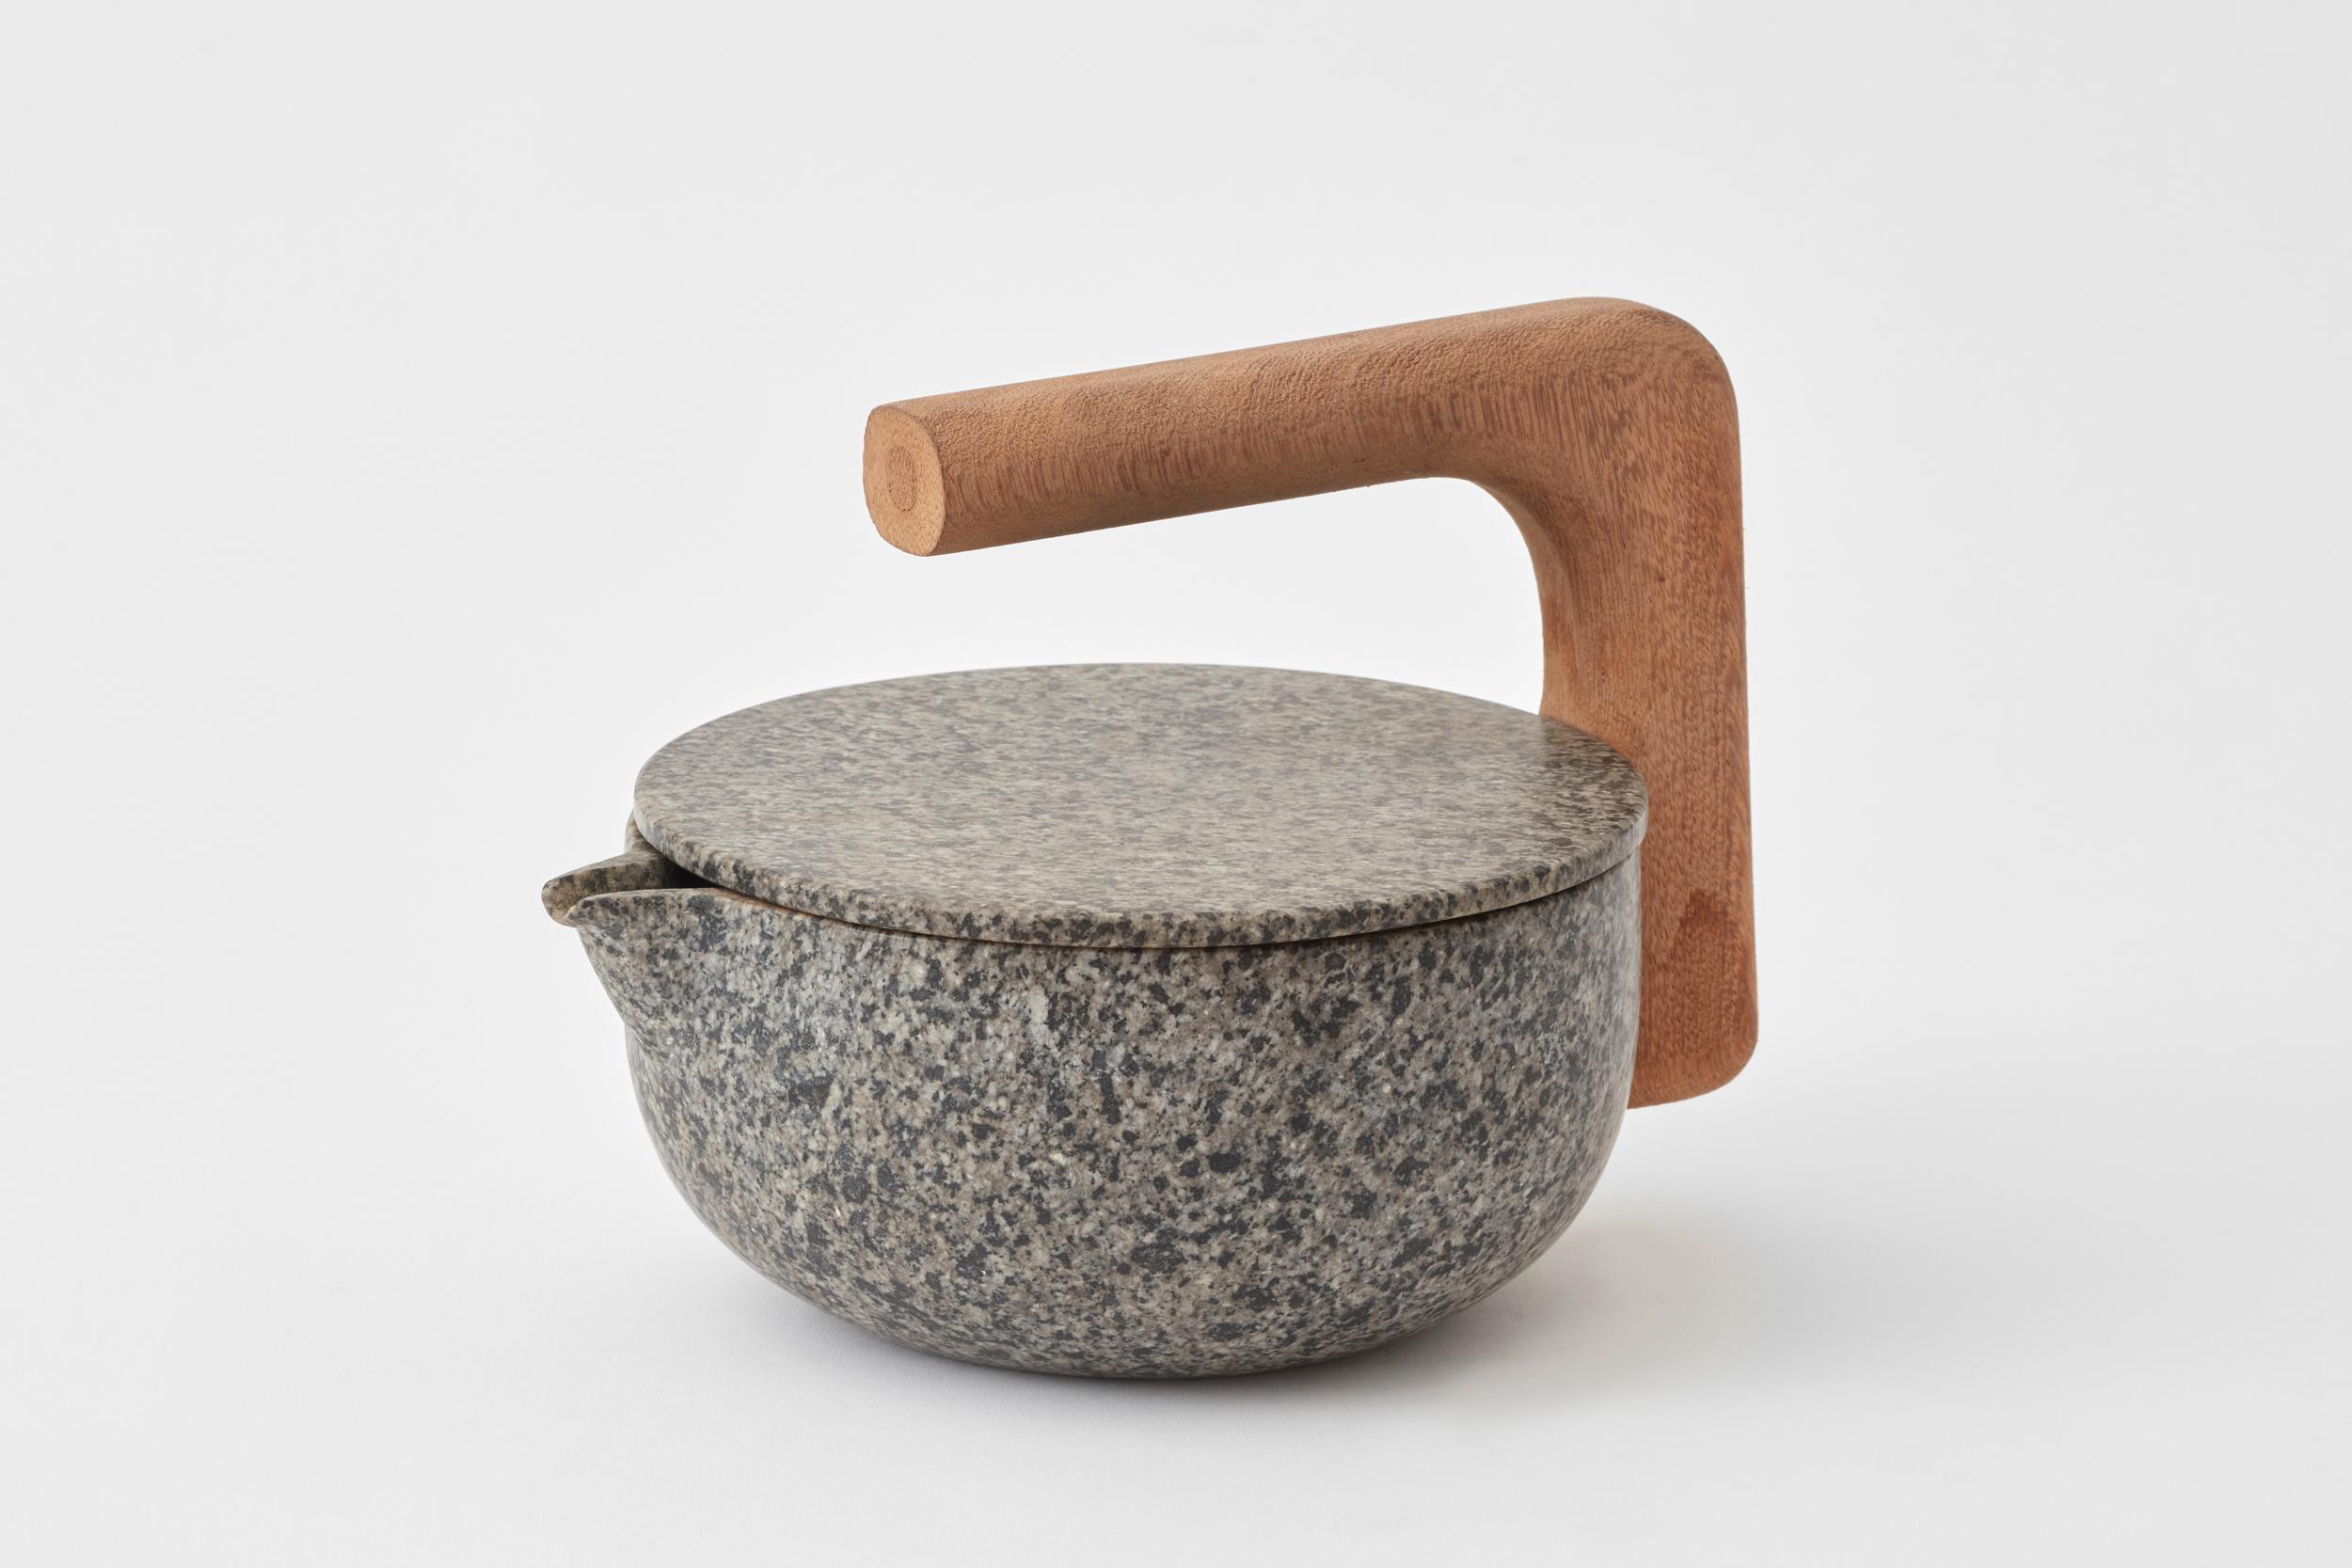 Teapot N°2 by Estudio Rafael Freyre
Dimensions: W 27 x D 15 x H 15.5 cm 
Materials: Andes Granite, Amazonic Wood.

Tea pot is an everyday object that explores the ritual relationship of water and plant use. Hot water, in contact with plant